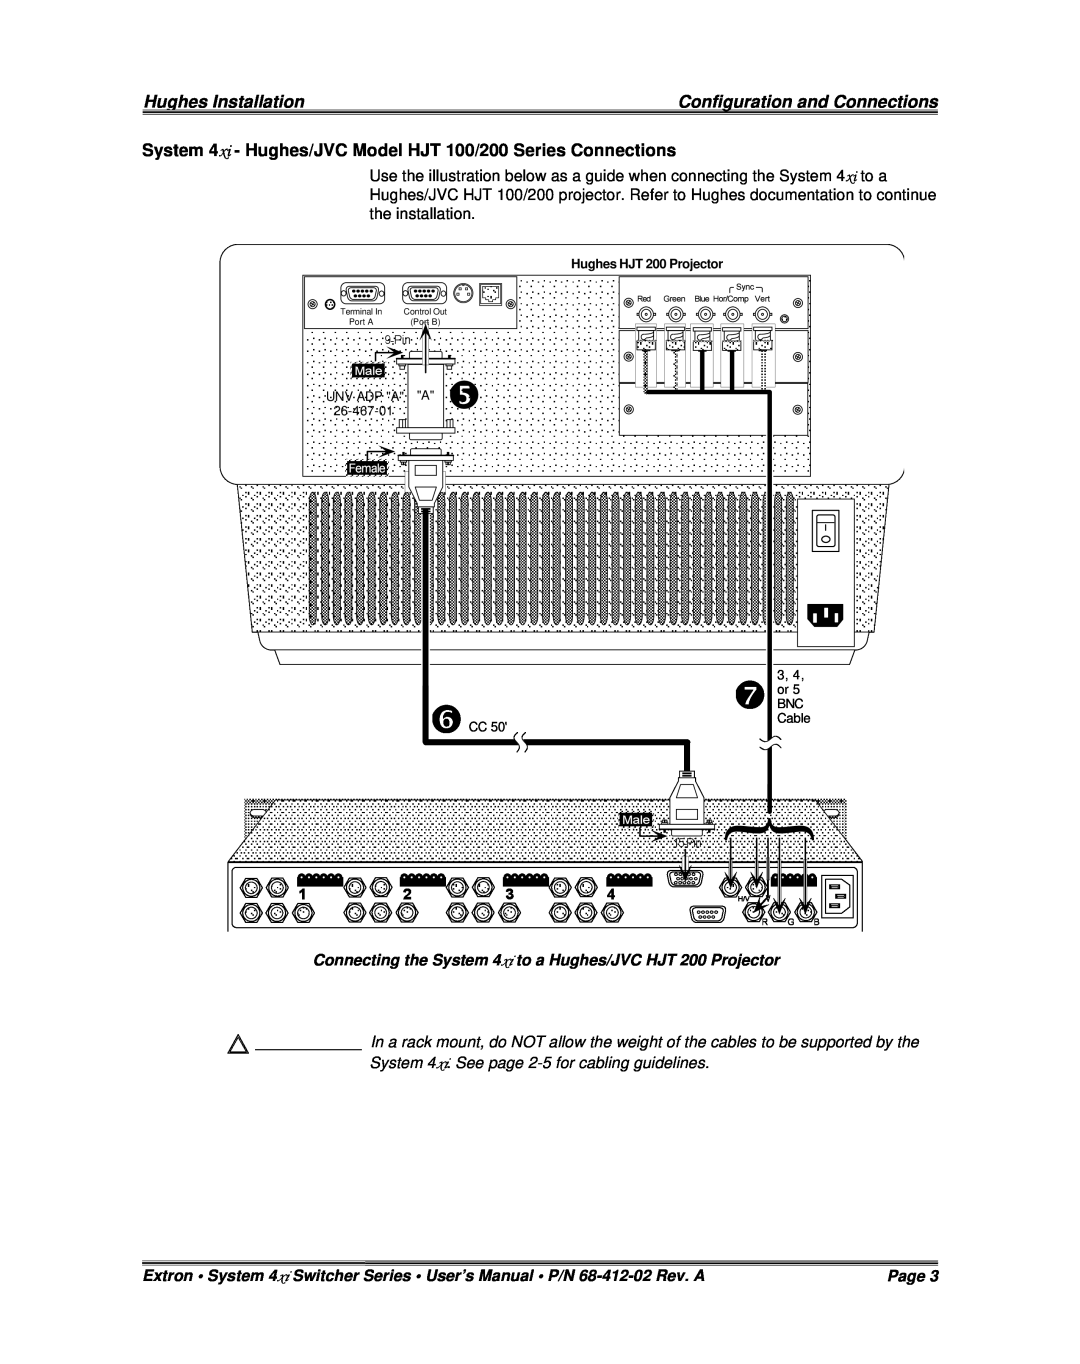 Extron electronic P/N 68-412-02 Hughes Installation, Configuration and Connections, Page, Hughes HJT 200 Projector, Port A 